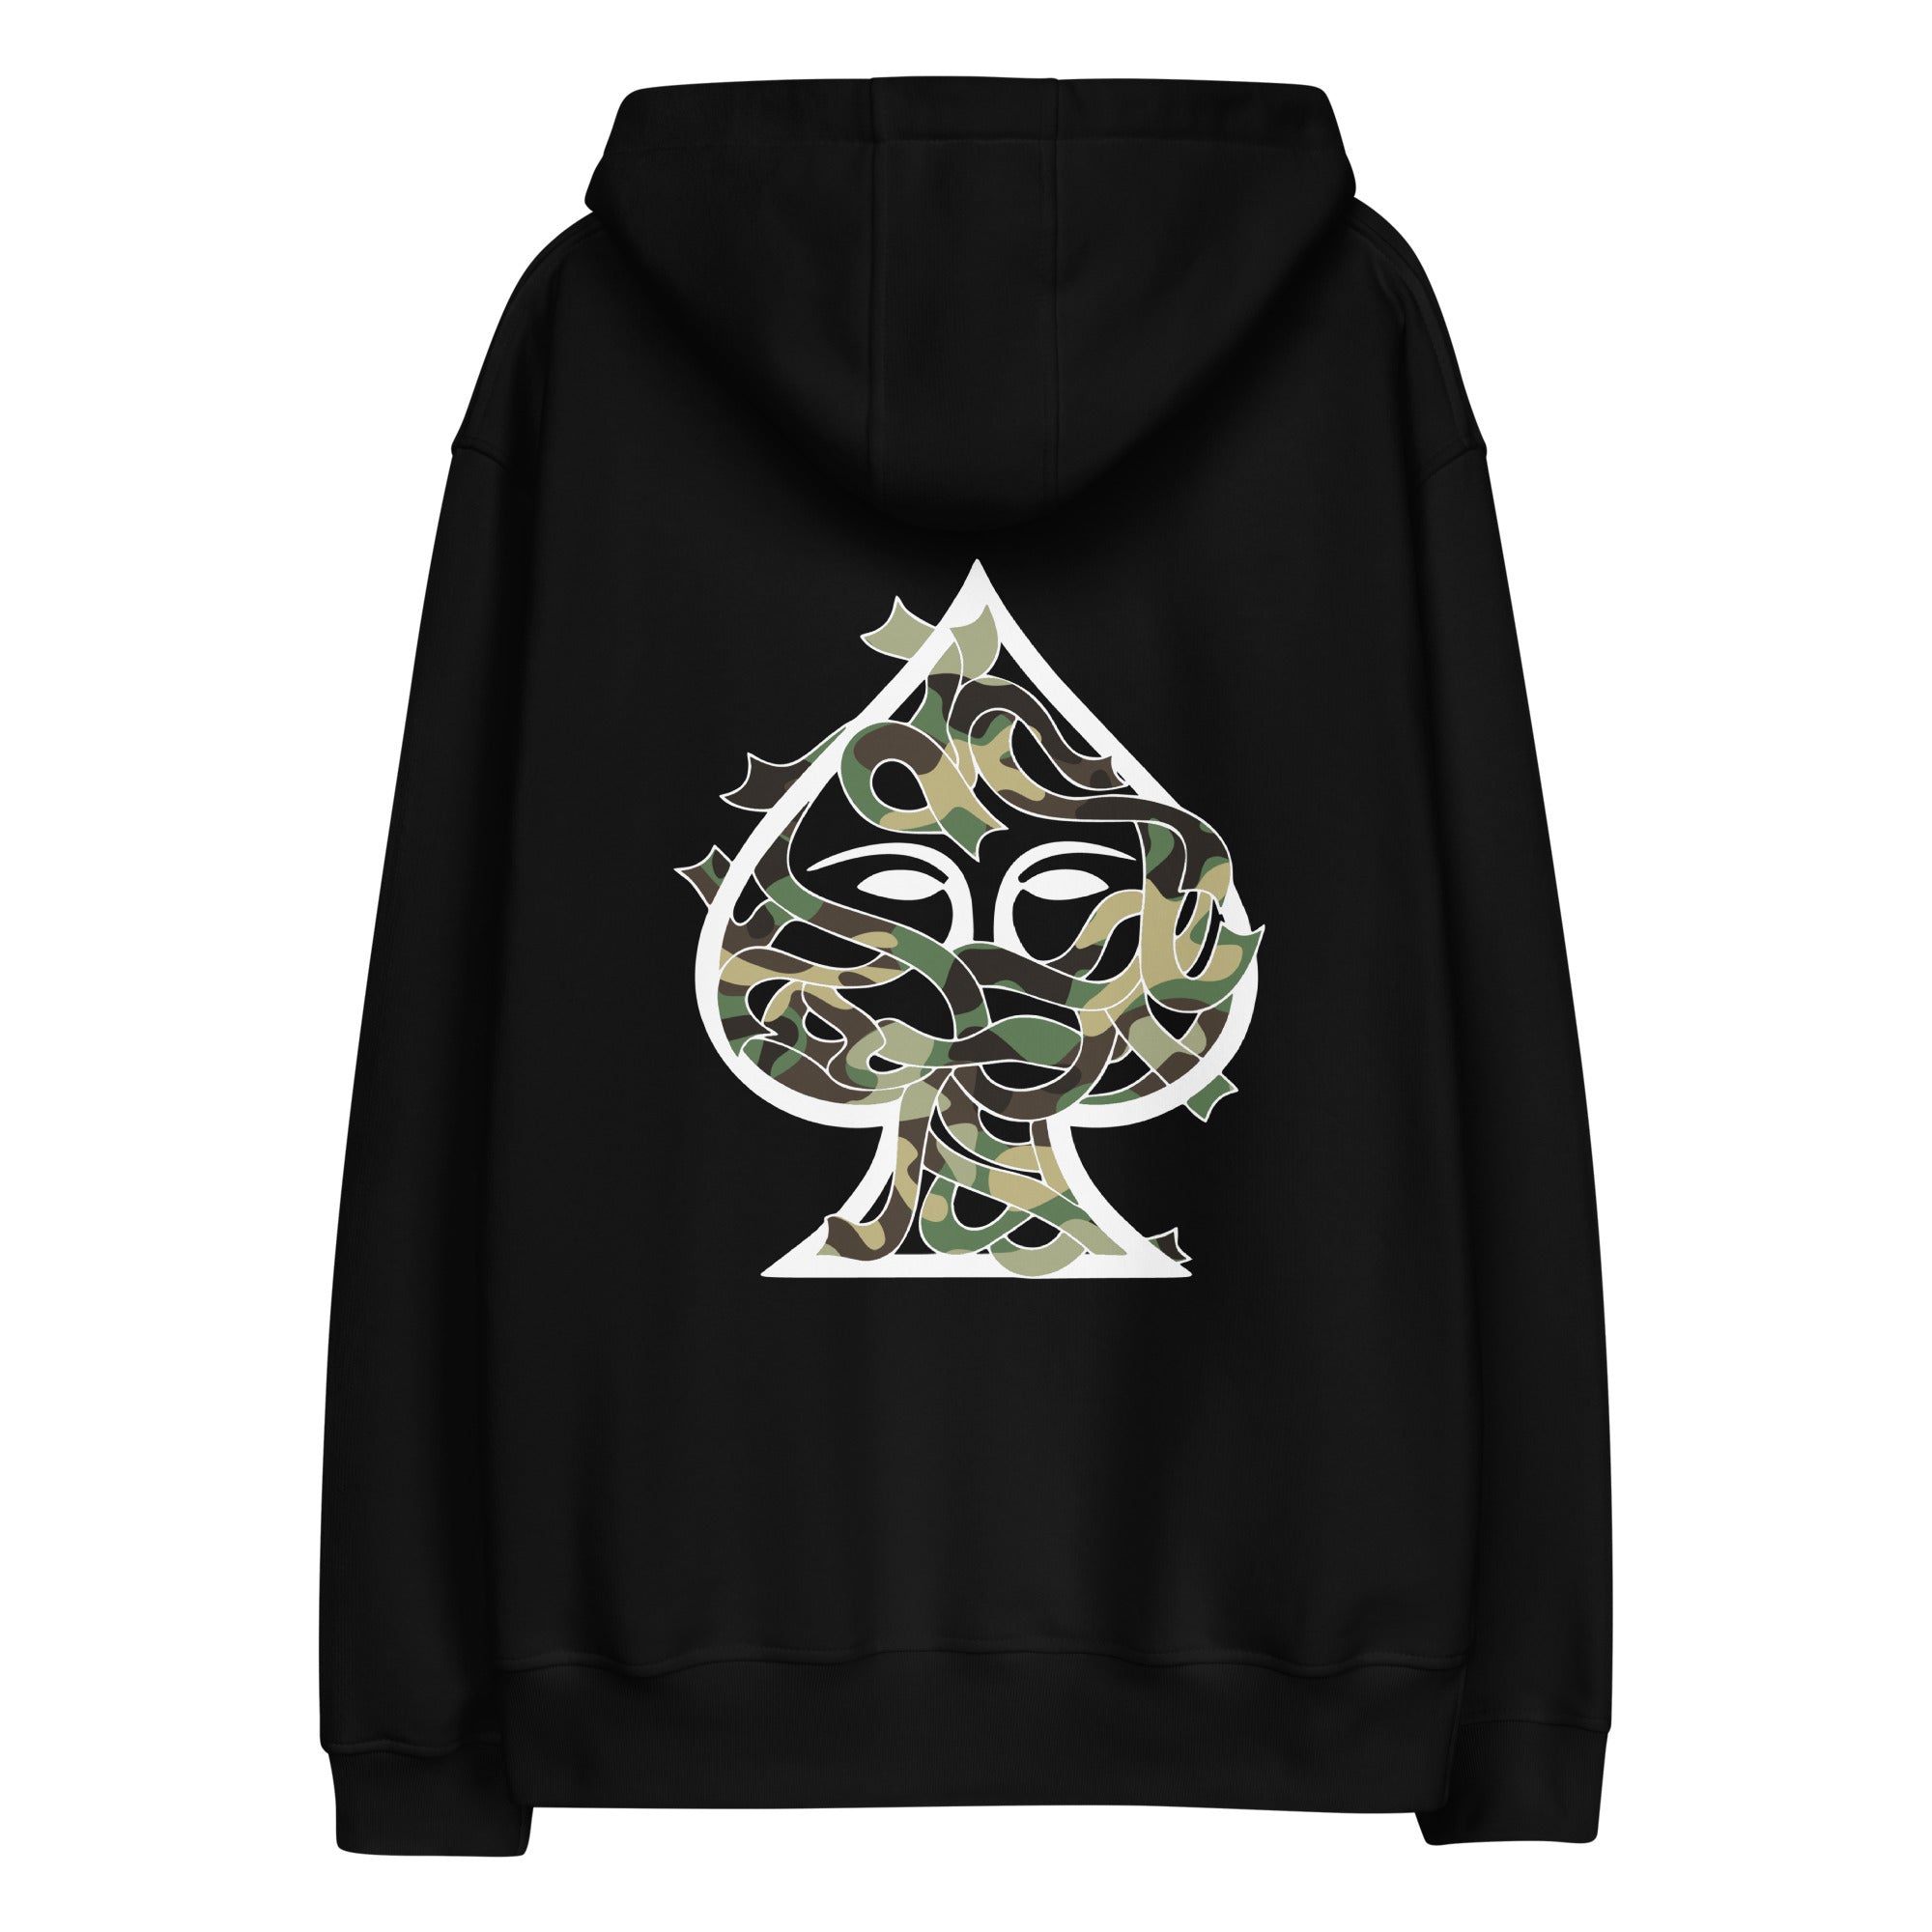 Green Camouflage Edition - Black Hoodie